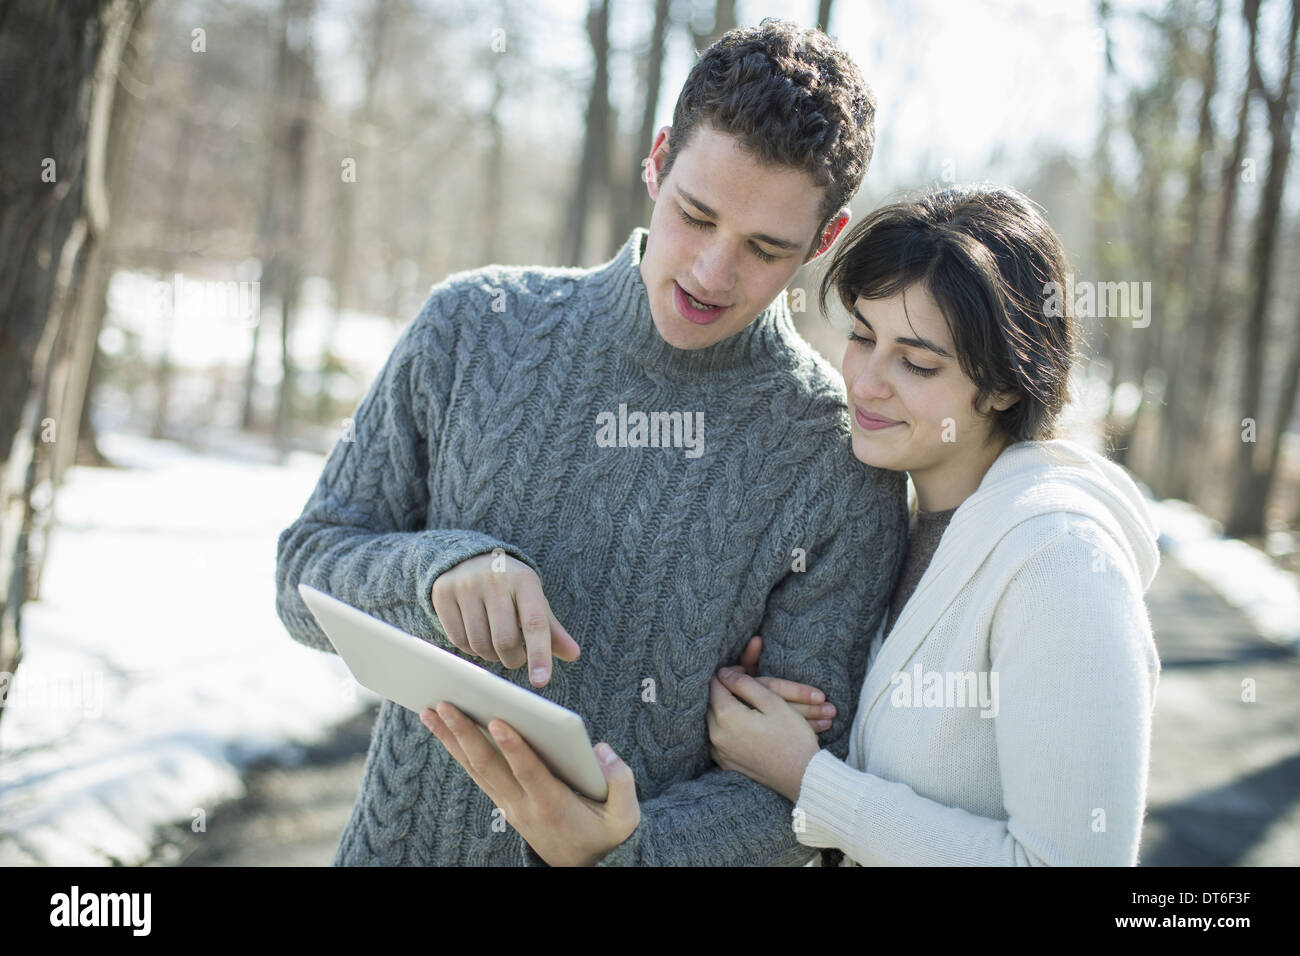 A couple looking at a computer tablet. Standing close together on a winter day in the woods. Stock Photo